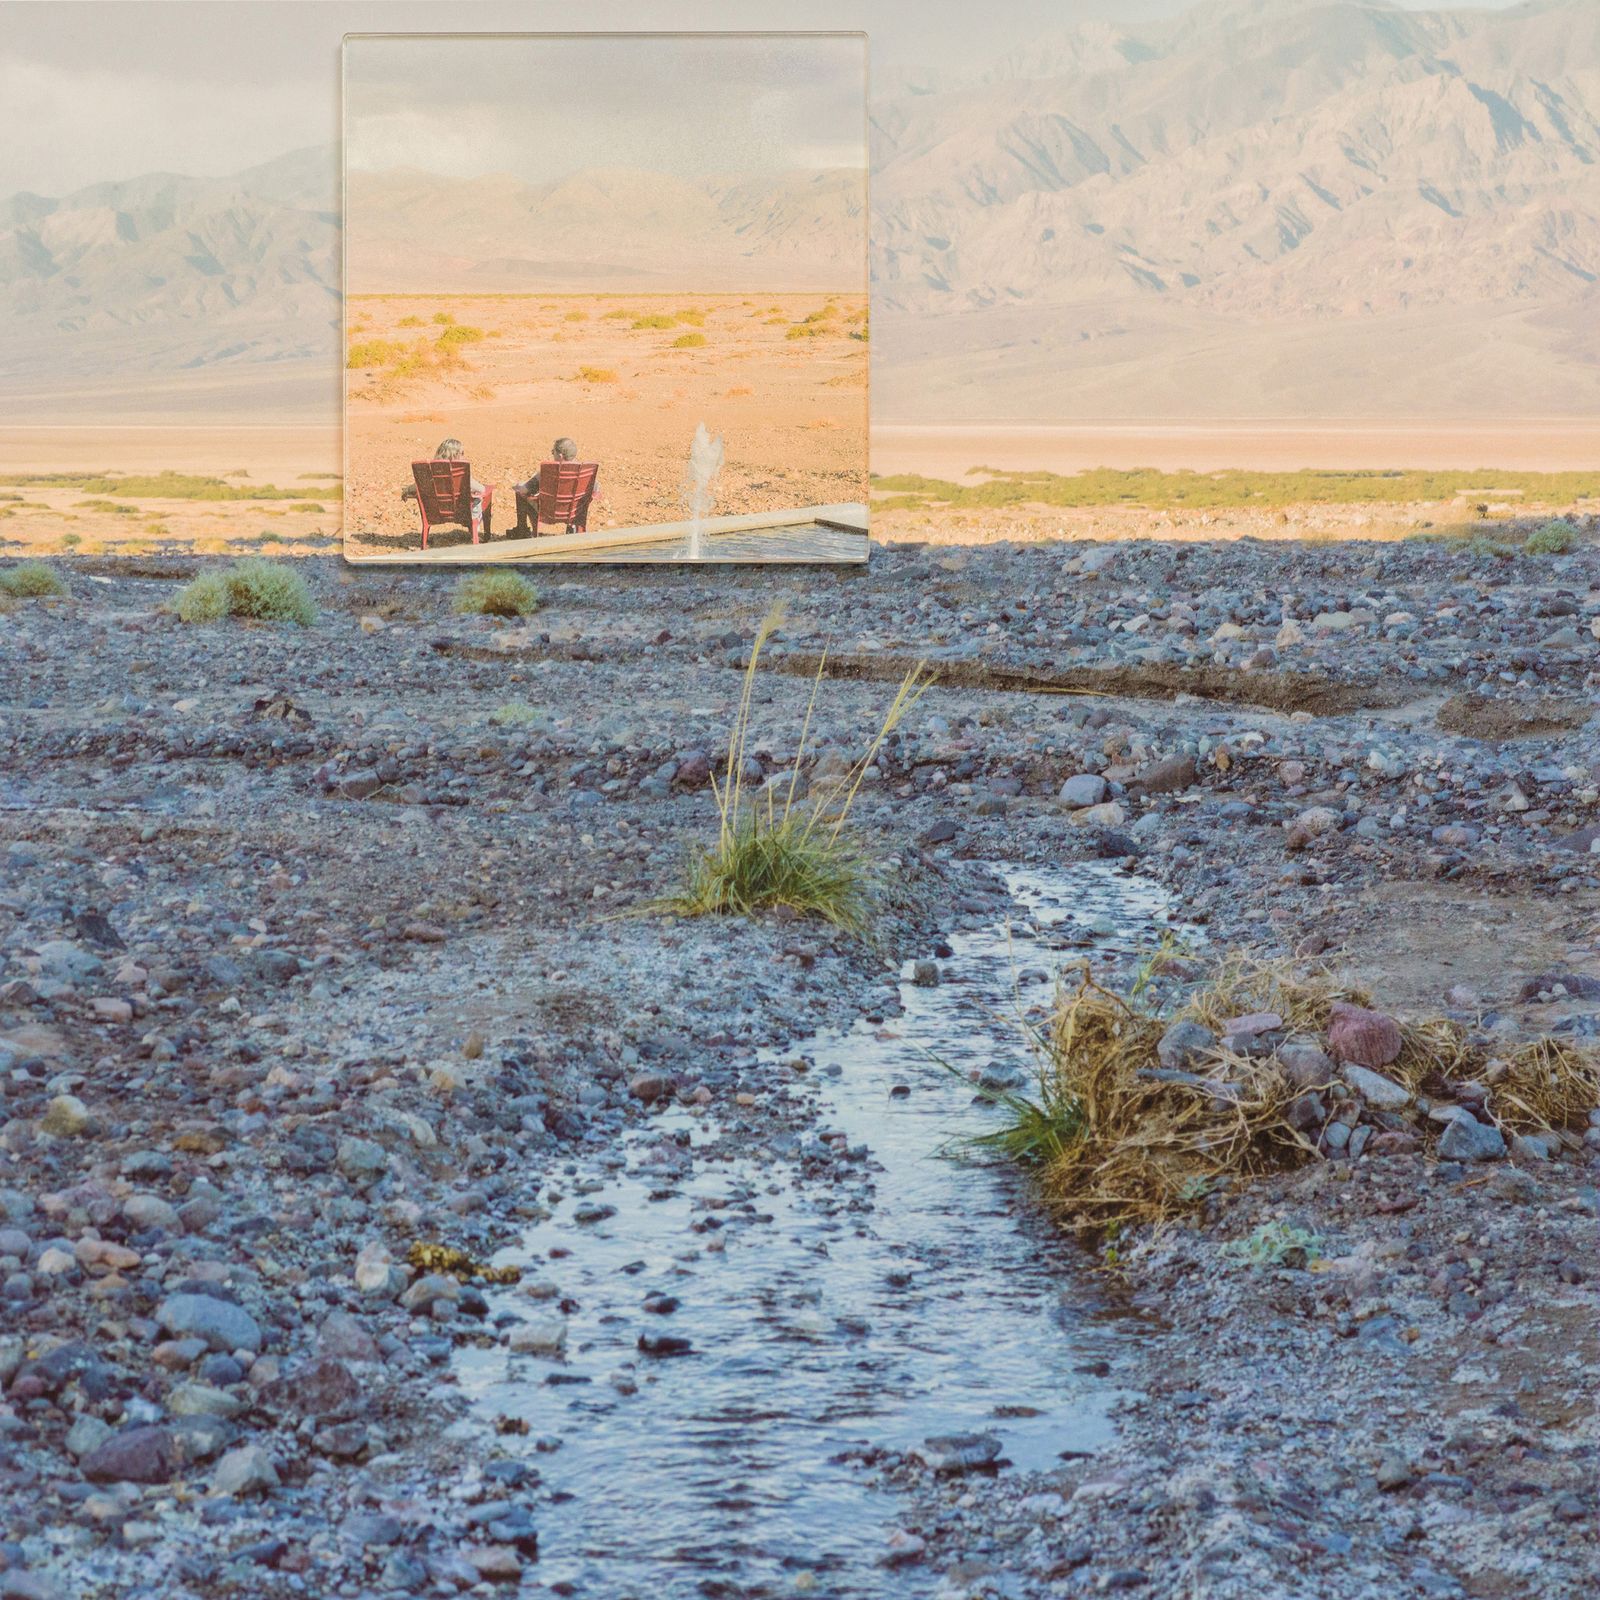 © Diana Cheren Nygren - A New Pool Image with mounted acrylic inset. Landscape - Death Valley. Inset - Washington DC and Death Valley composite